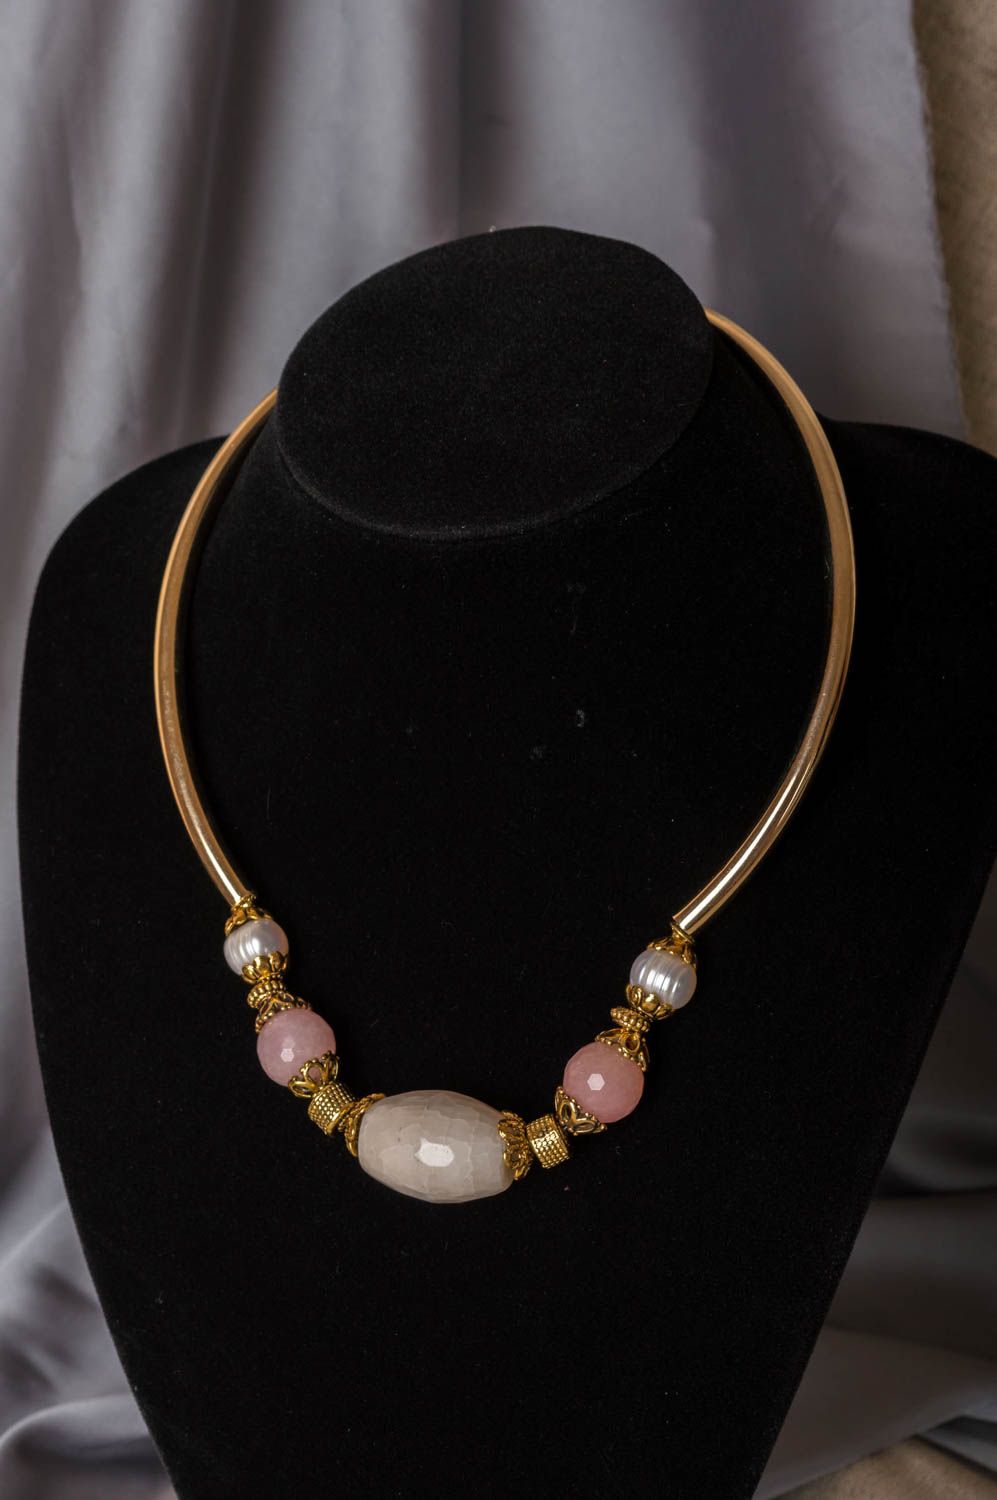 Handmade necklace made of natural stone and brass stylish accessory for women photo 1